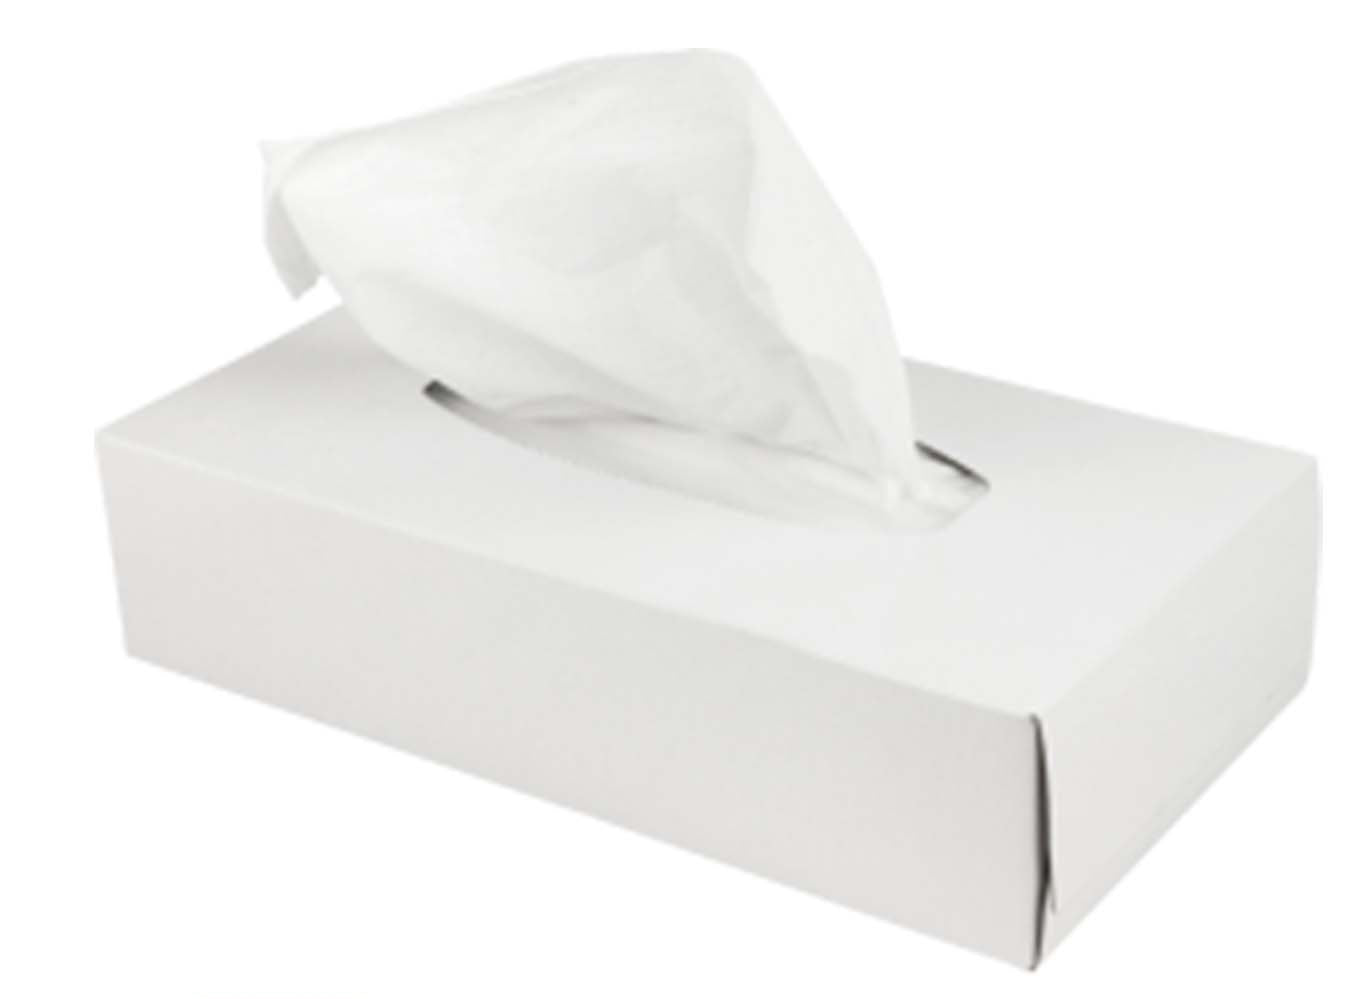 Facial tissues rectangle - 100 2-layered tissues